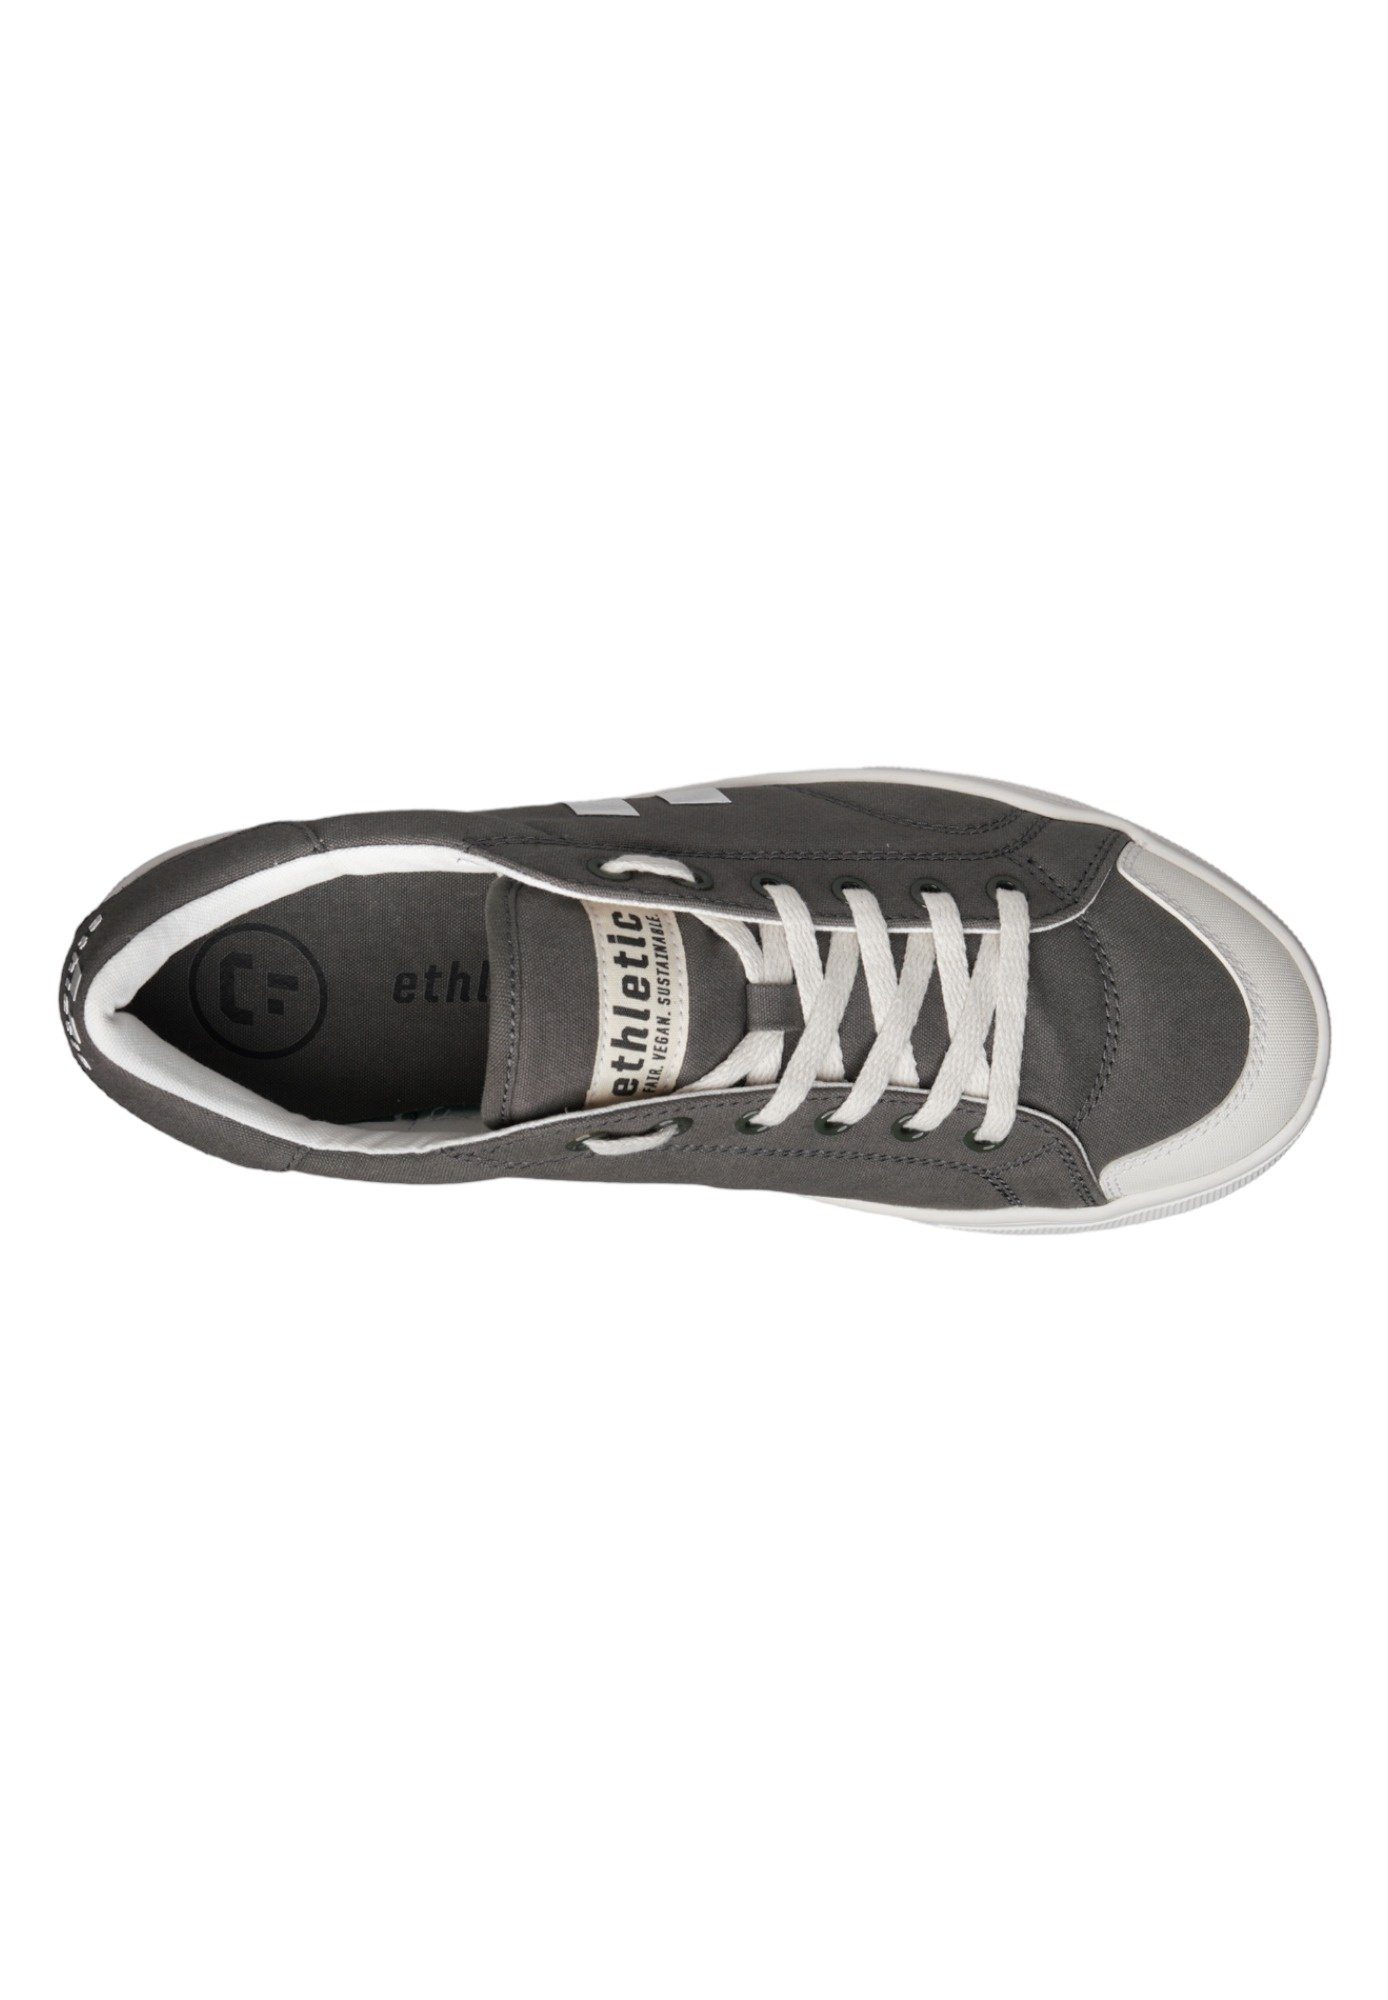 Sneaker - Fairtrade ETHLETIC White Grey Just Lo Cut Active Produkt Donkey